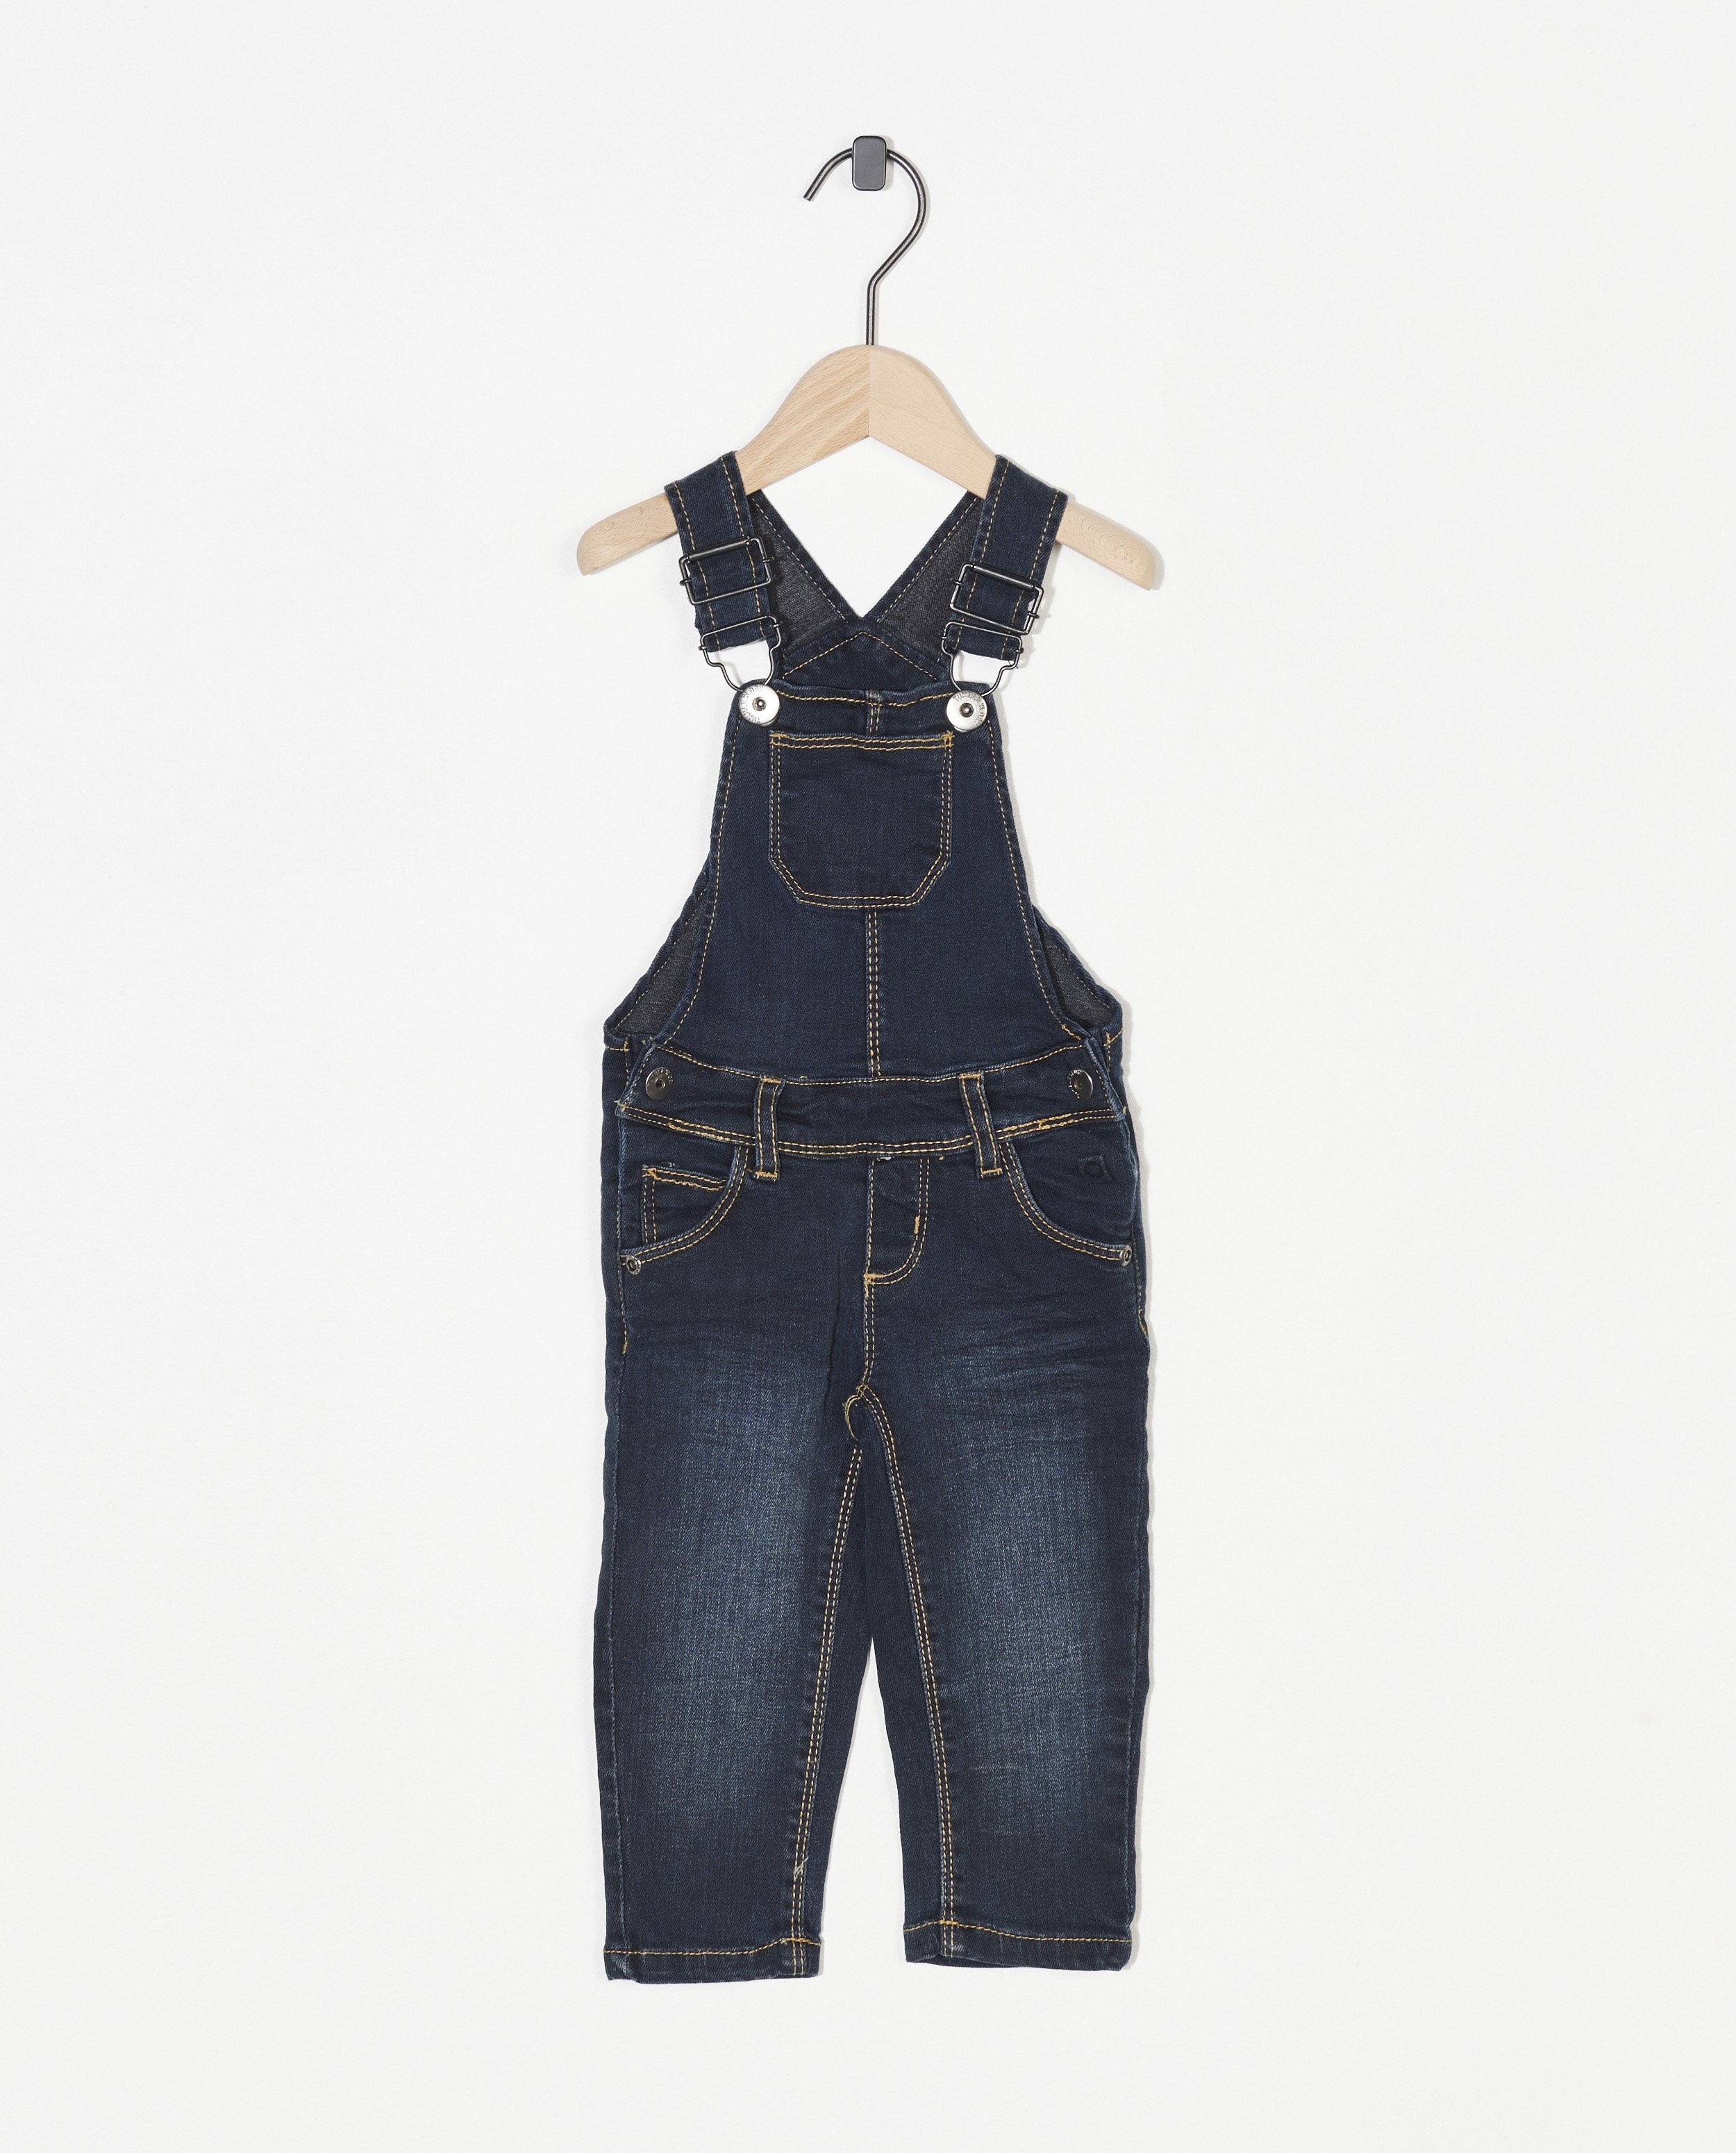 Jeanssalopette Tumble 'n Dry - met lichte wassing - Tumble 'n Dry